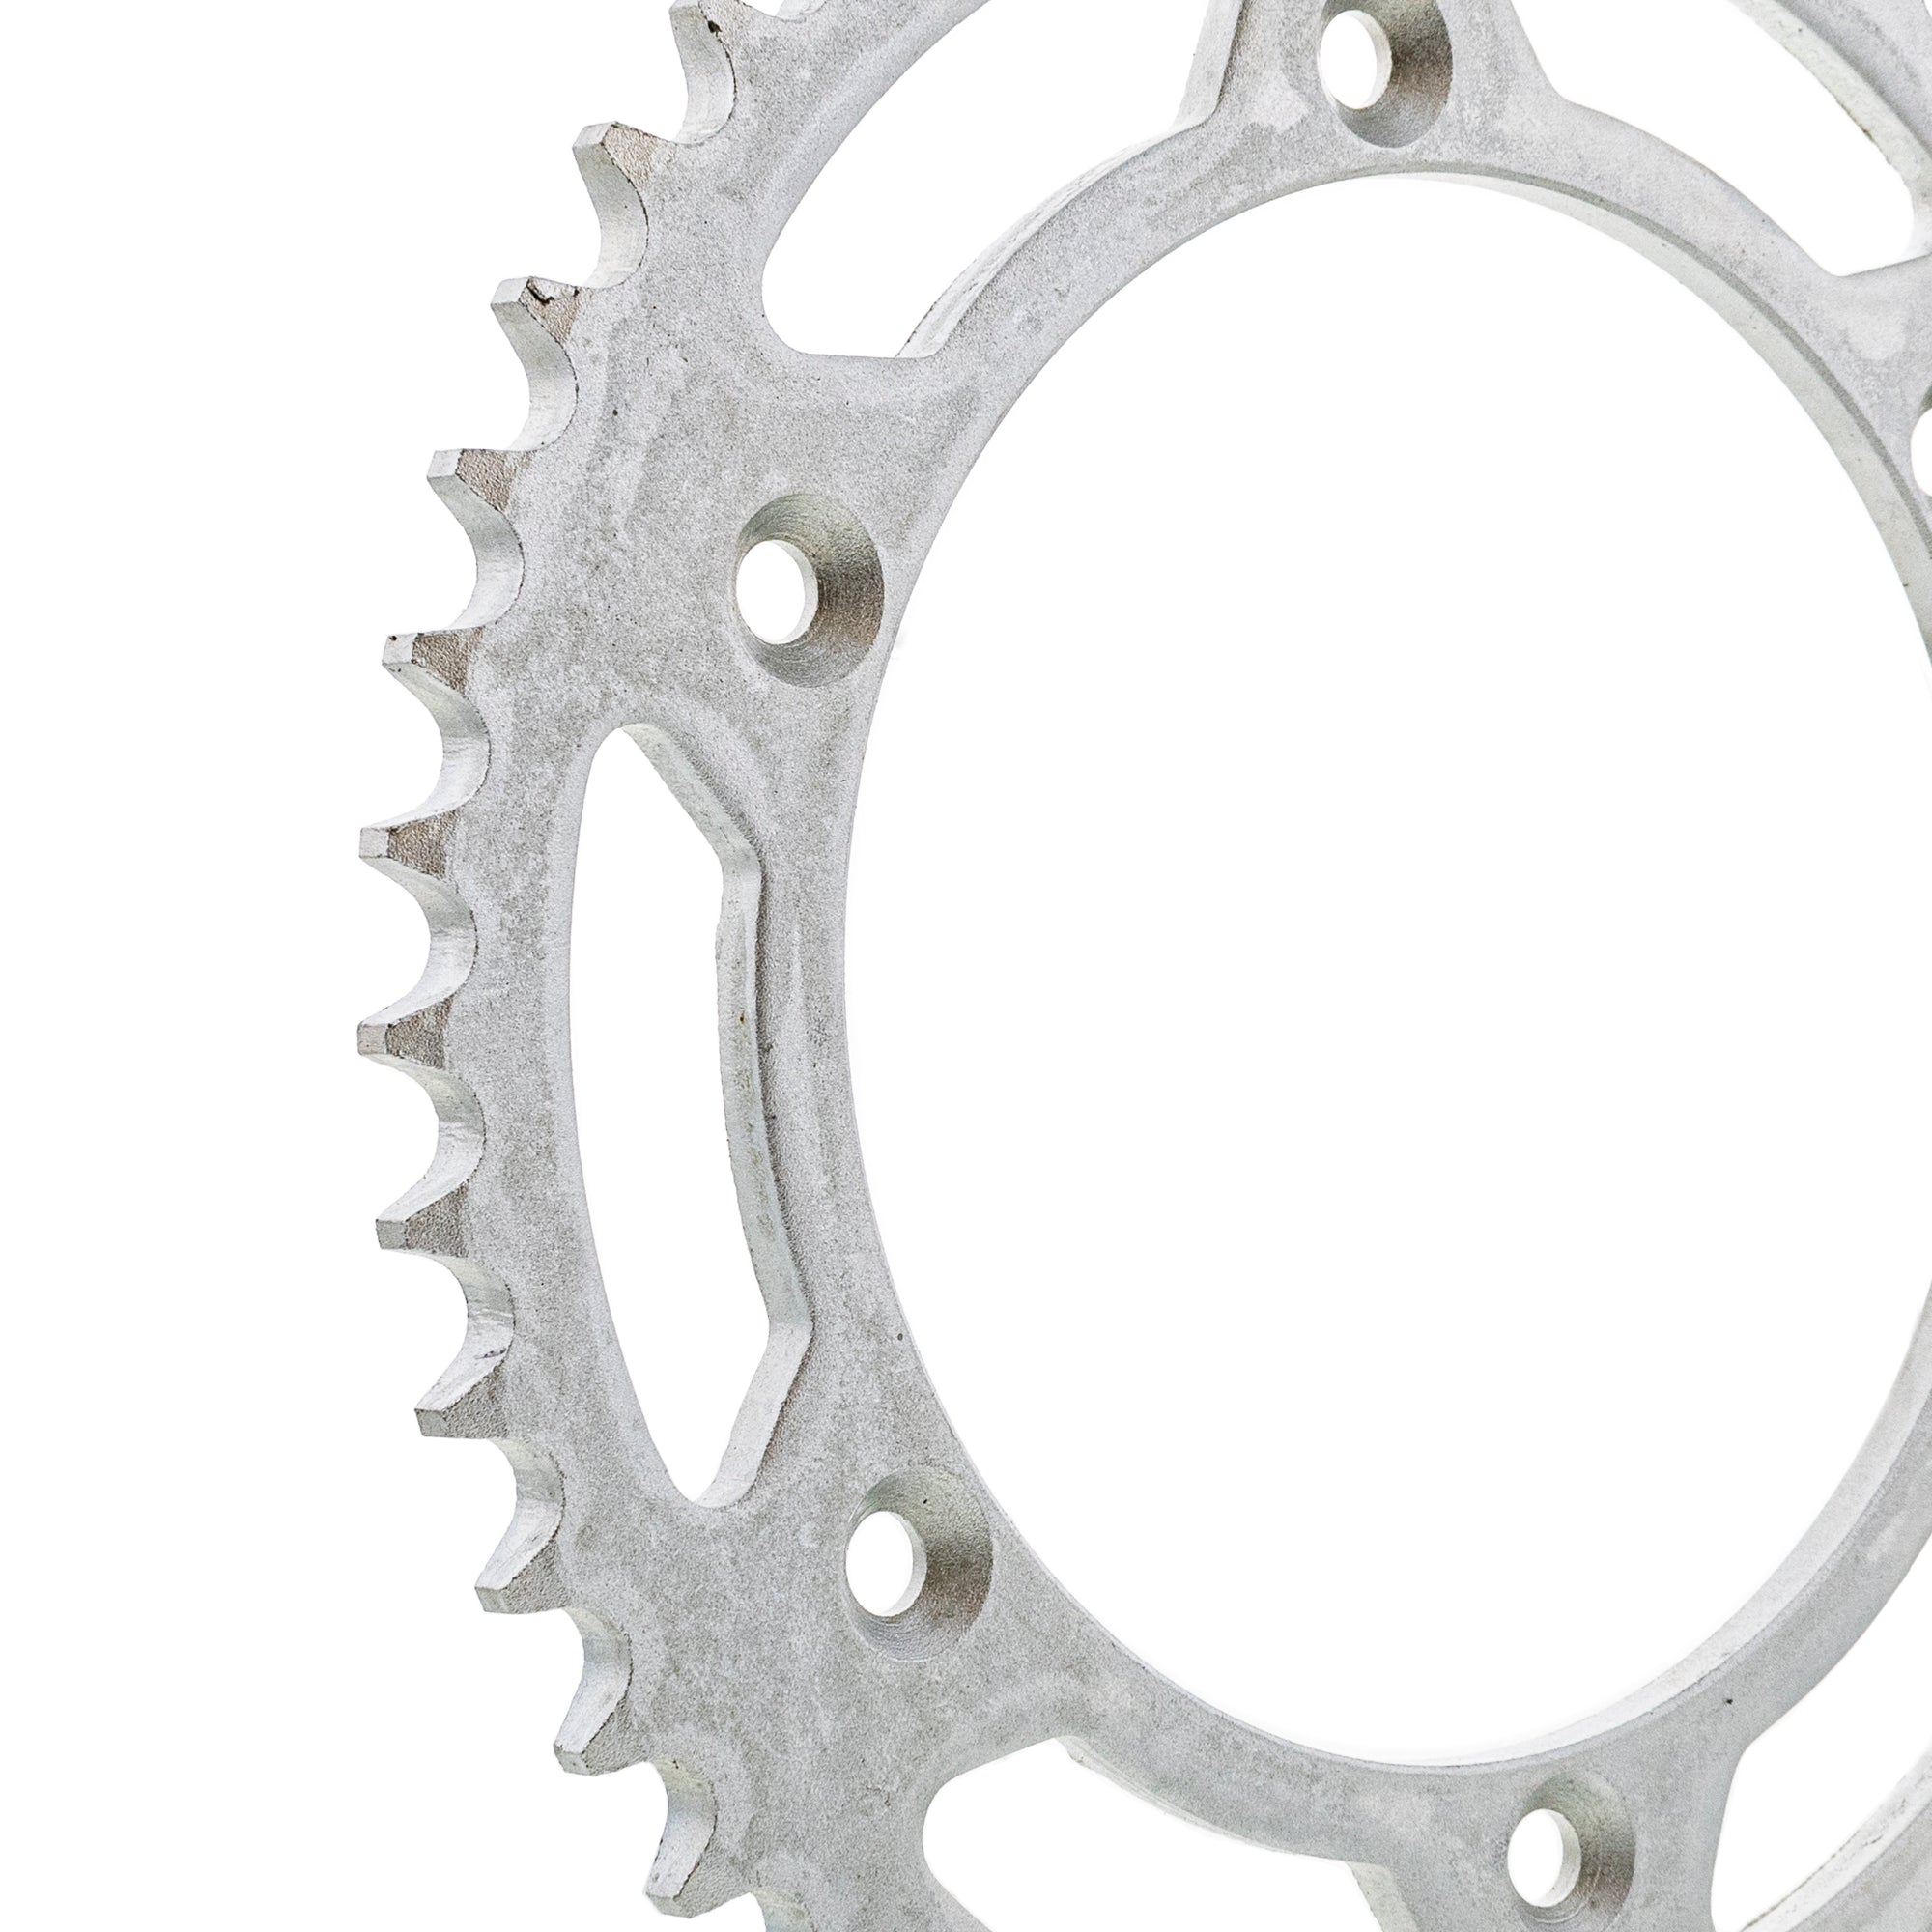 525 Pitch 47 Tooth Rear Drive Sprocket for Suzuki DR800 Motorcycle